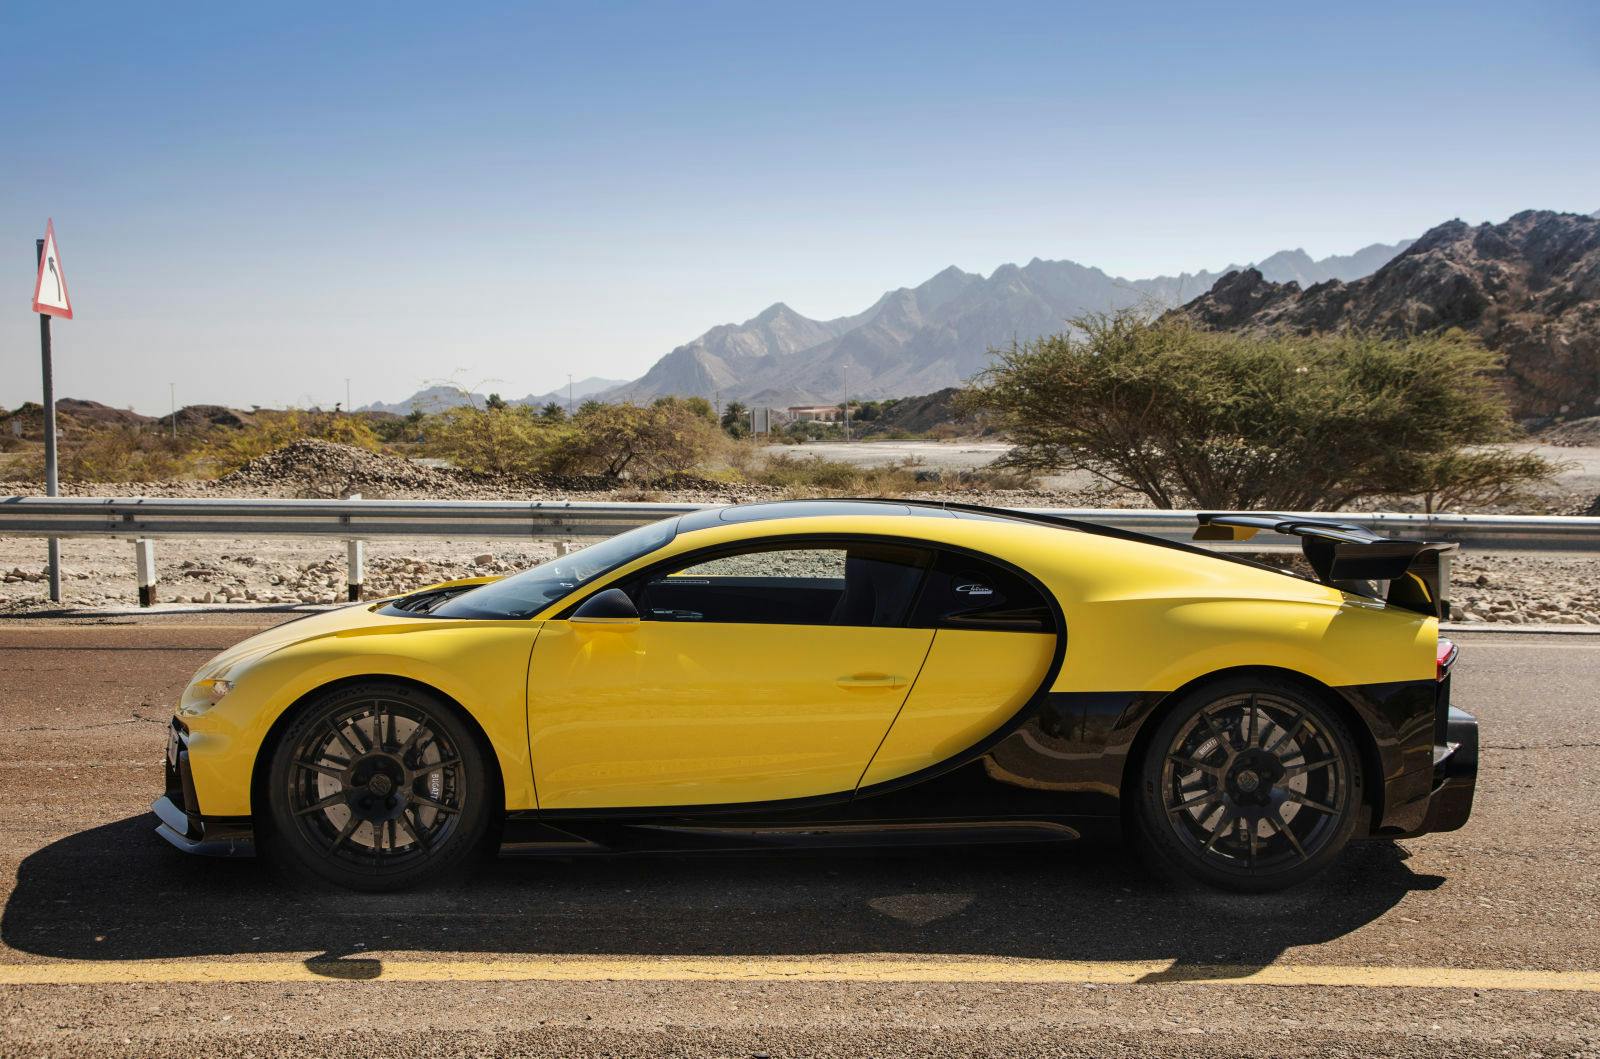 The Chiron Pur Sport with the Jaune Molsheim and Carbon colour split.